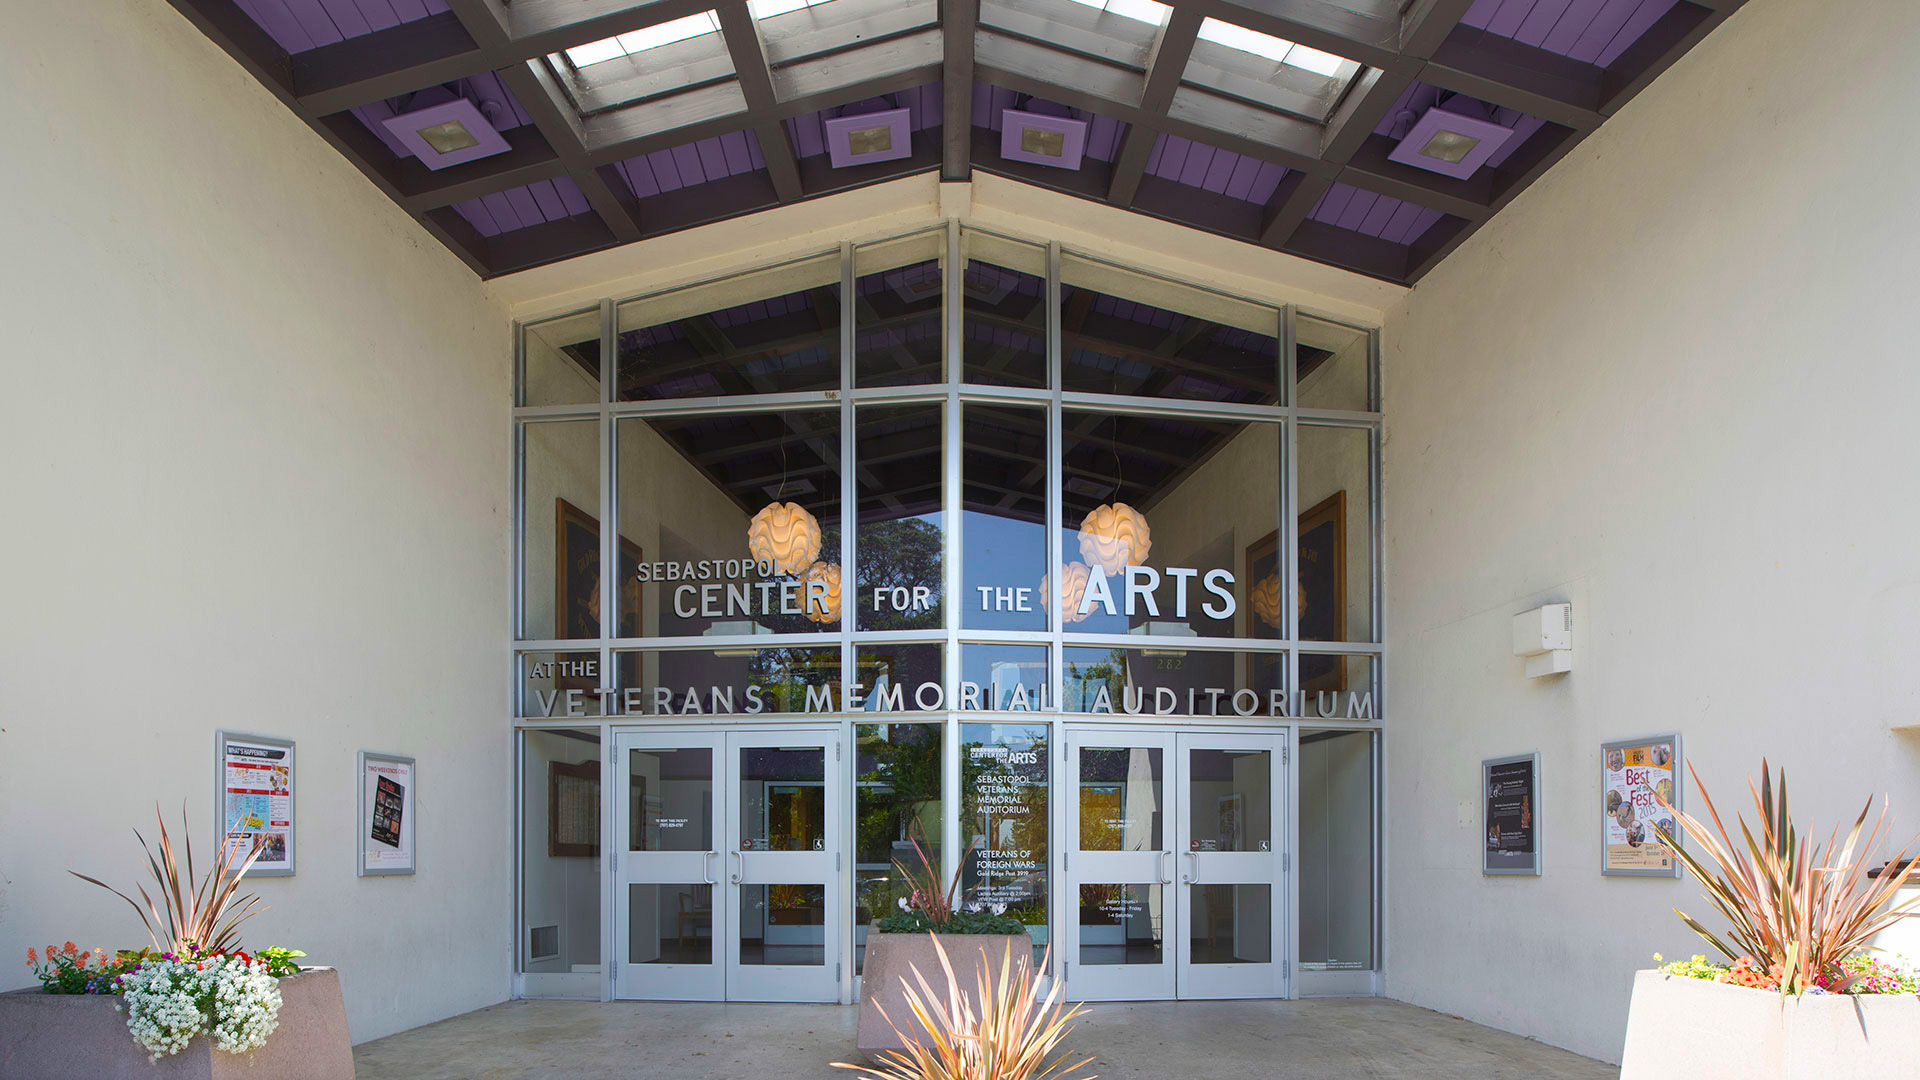 Entrance to the Center for the Arts, with vast glass walls and purple ceiling tiles spaced with skylights